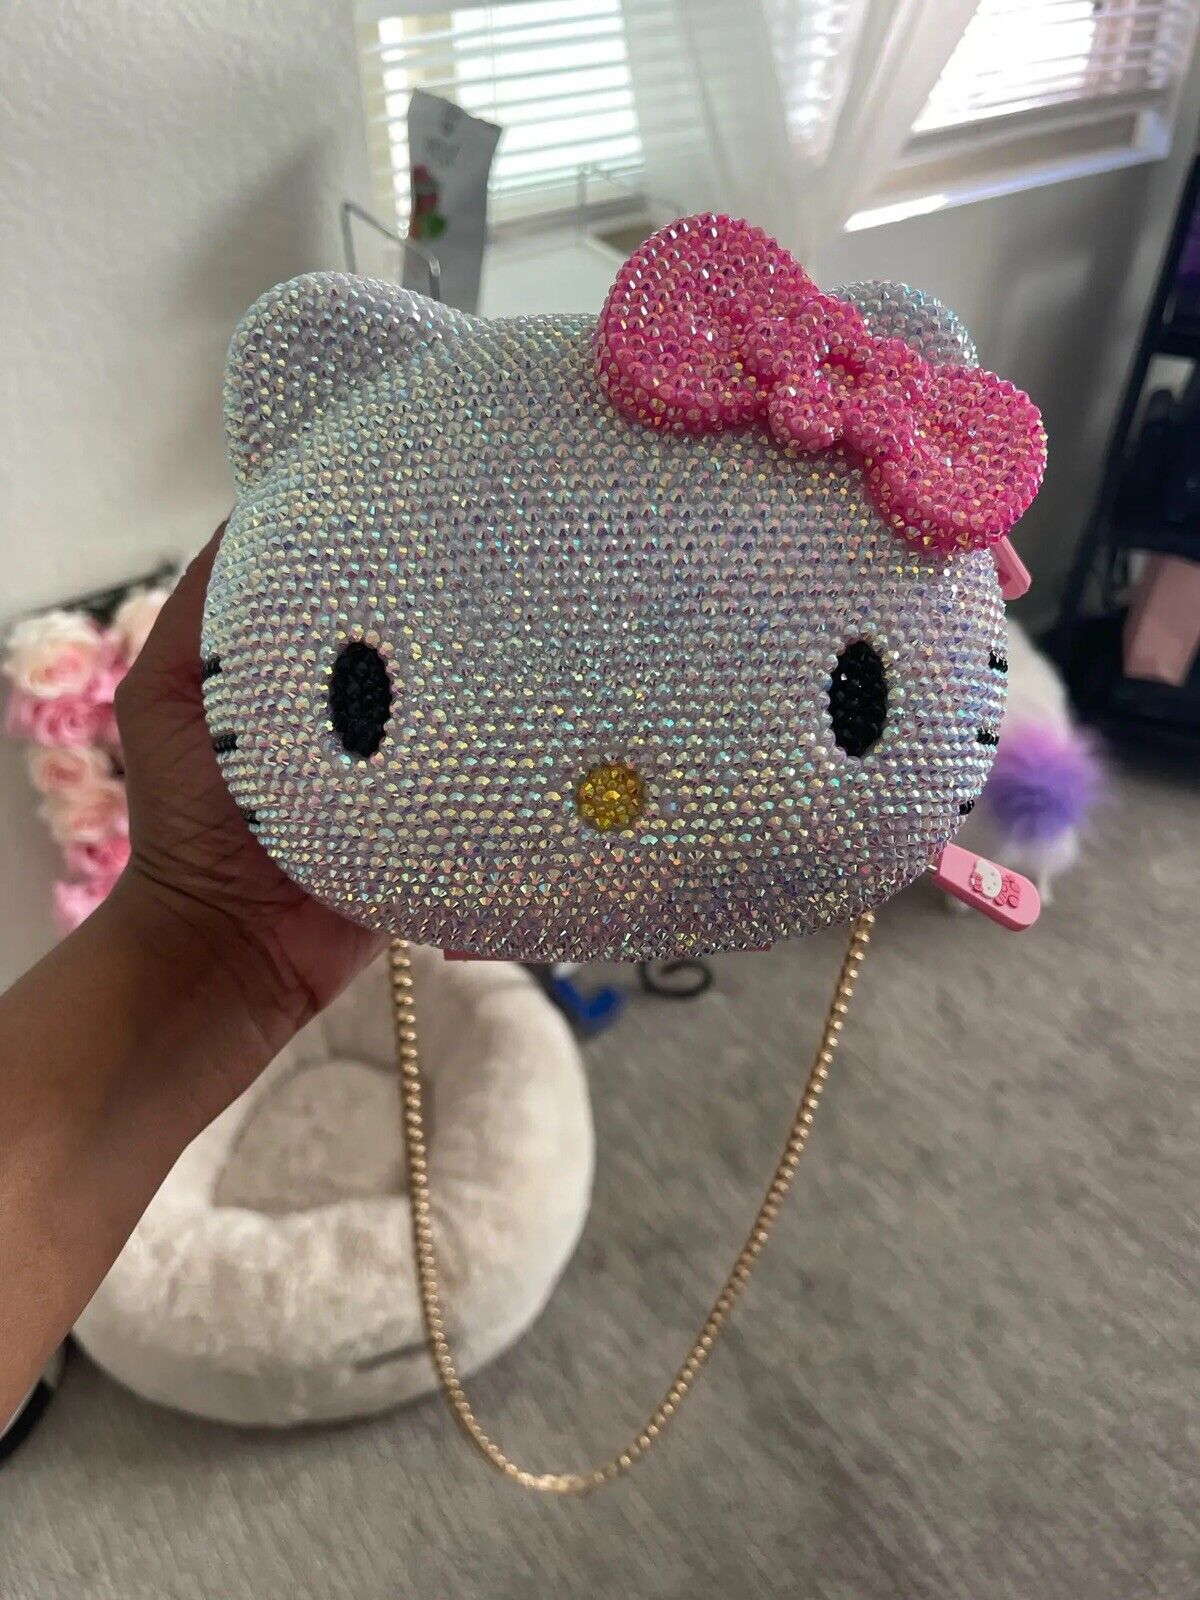 HELLO KITTY BEDAZZLED BLING DIAMOND CRYSTAL CLUTCH PURSE BRIDE BRIDESMAID GIFT 